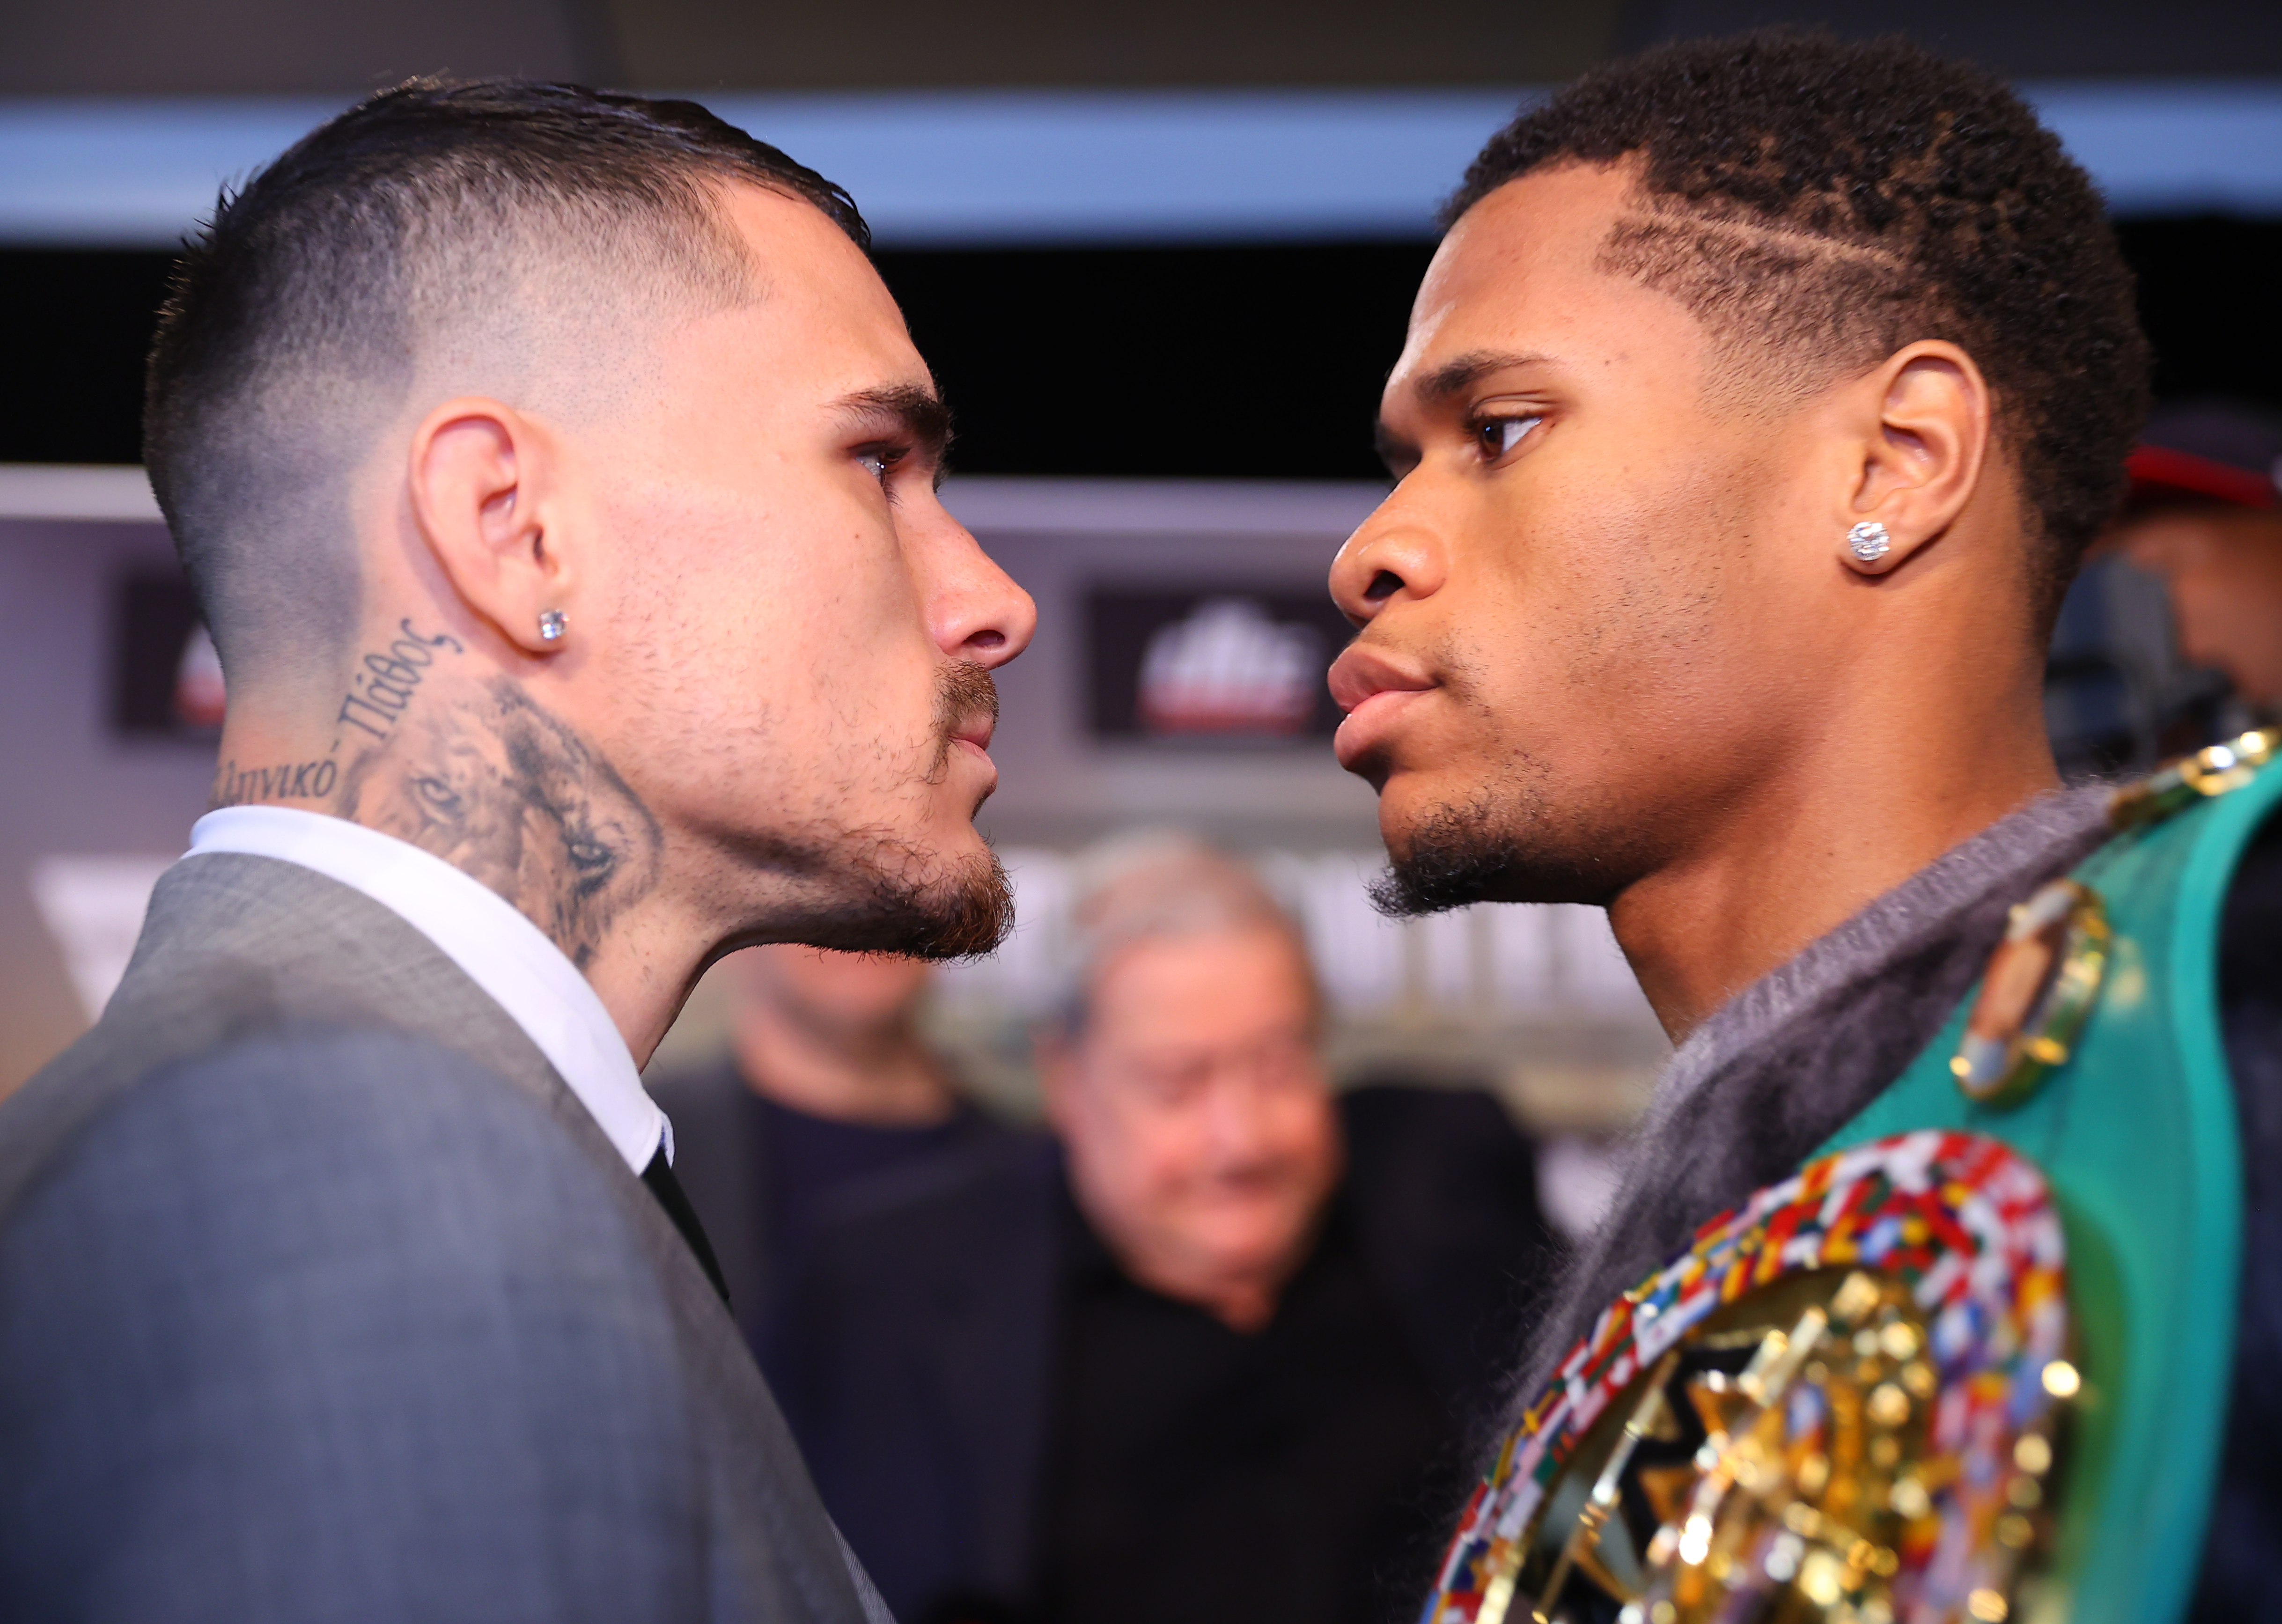 Devin Haney is favored over George Kambosos Jr to unify the WBC, WBA, IBF, and WBO lightweight titles